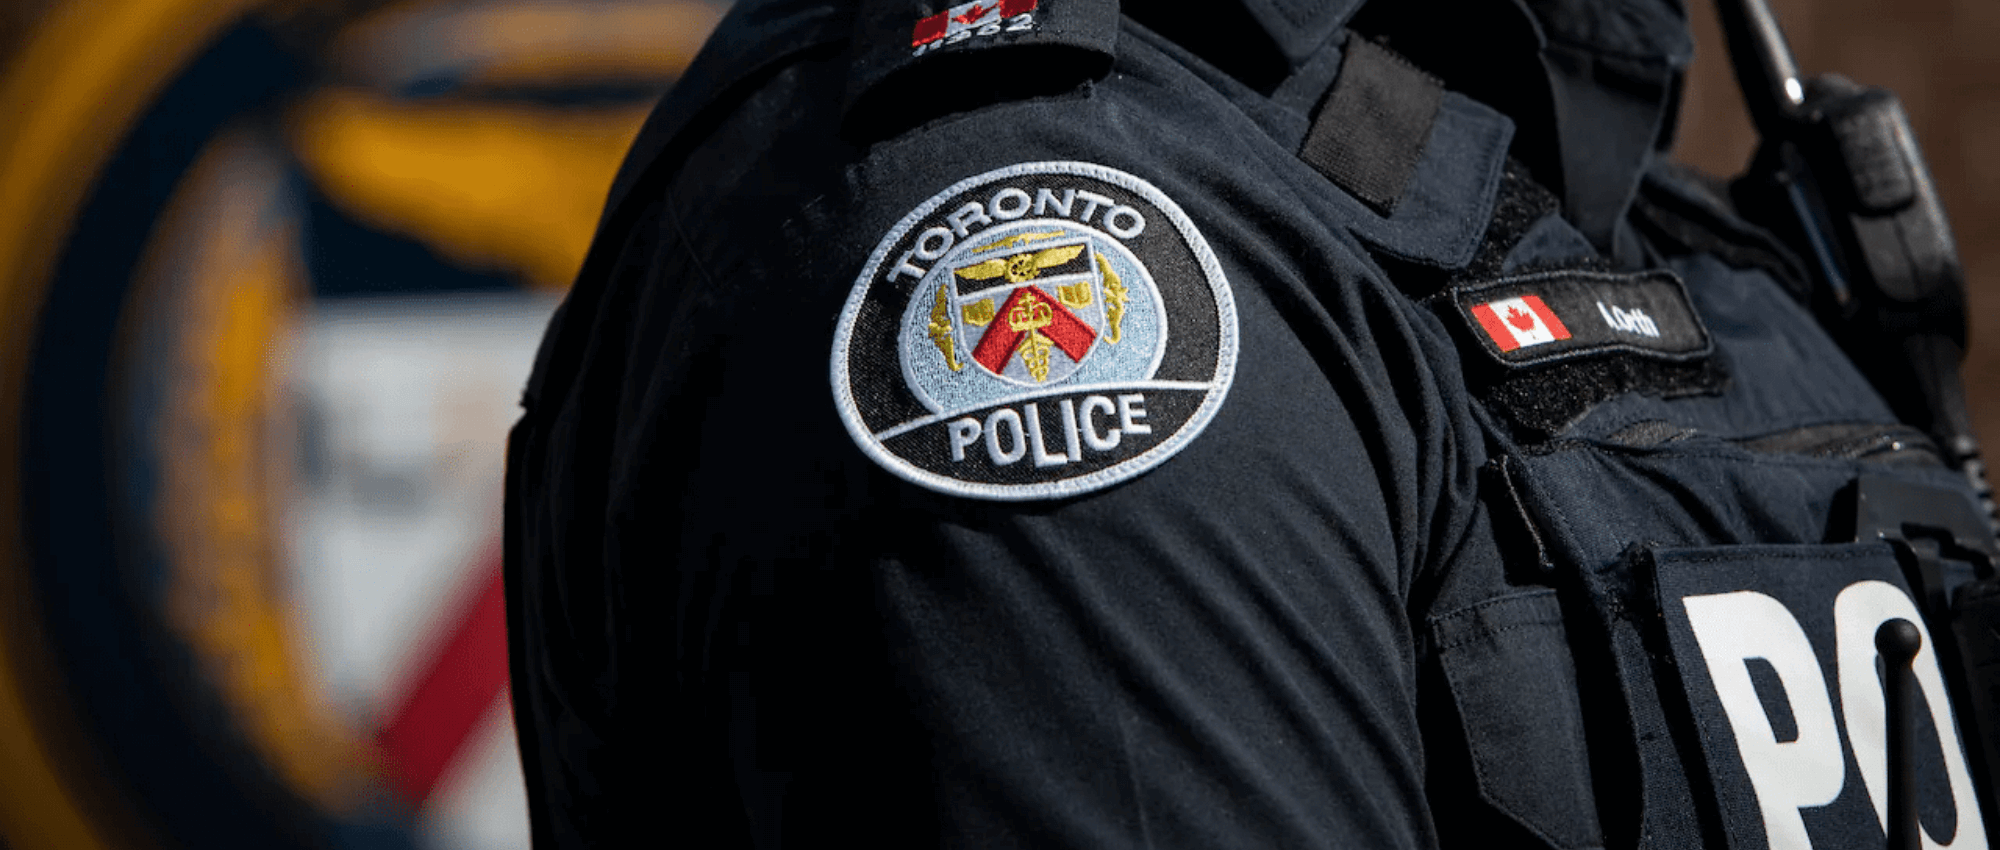 civilian and uniform police positions with Toronto Police